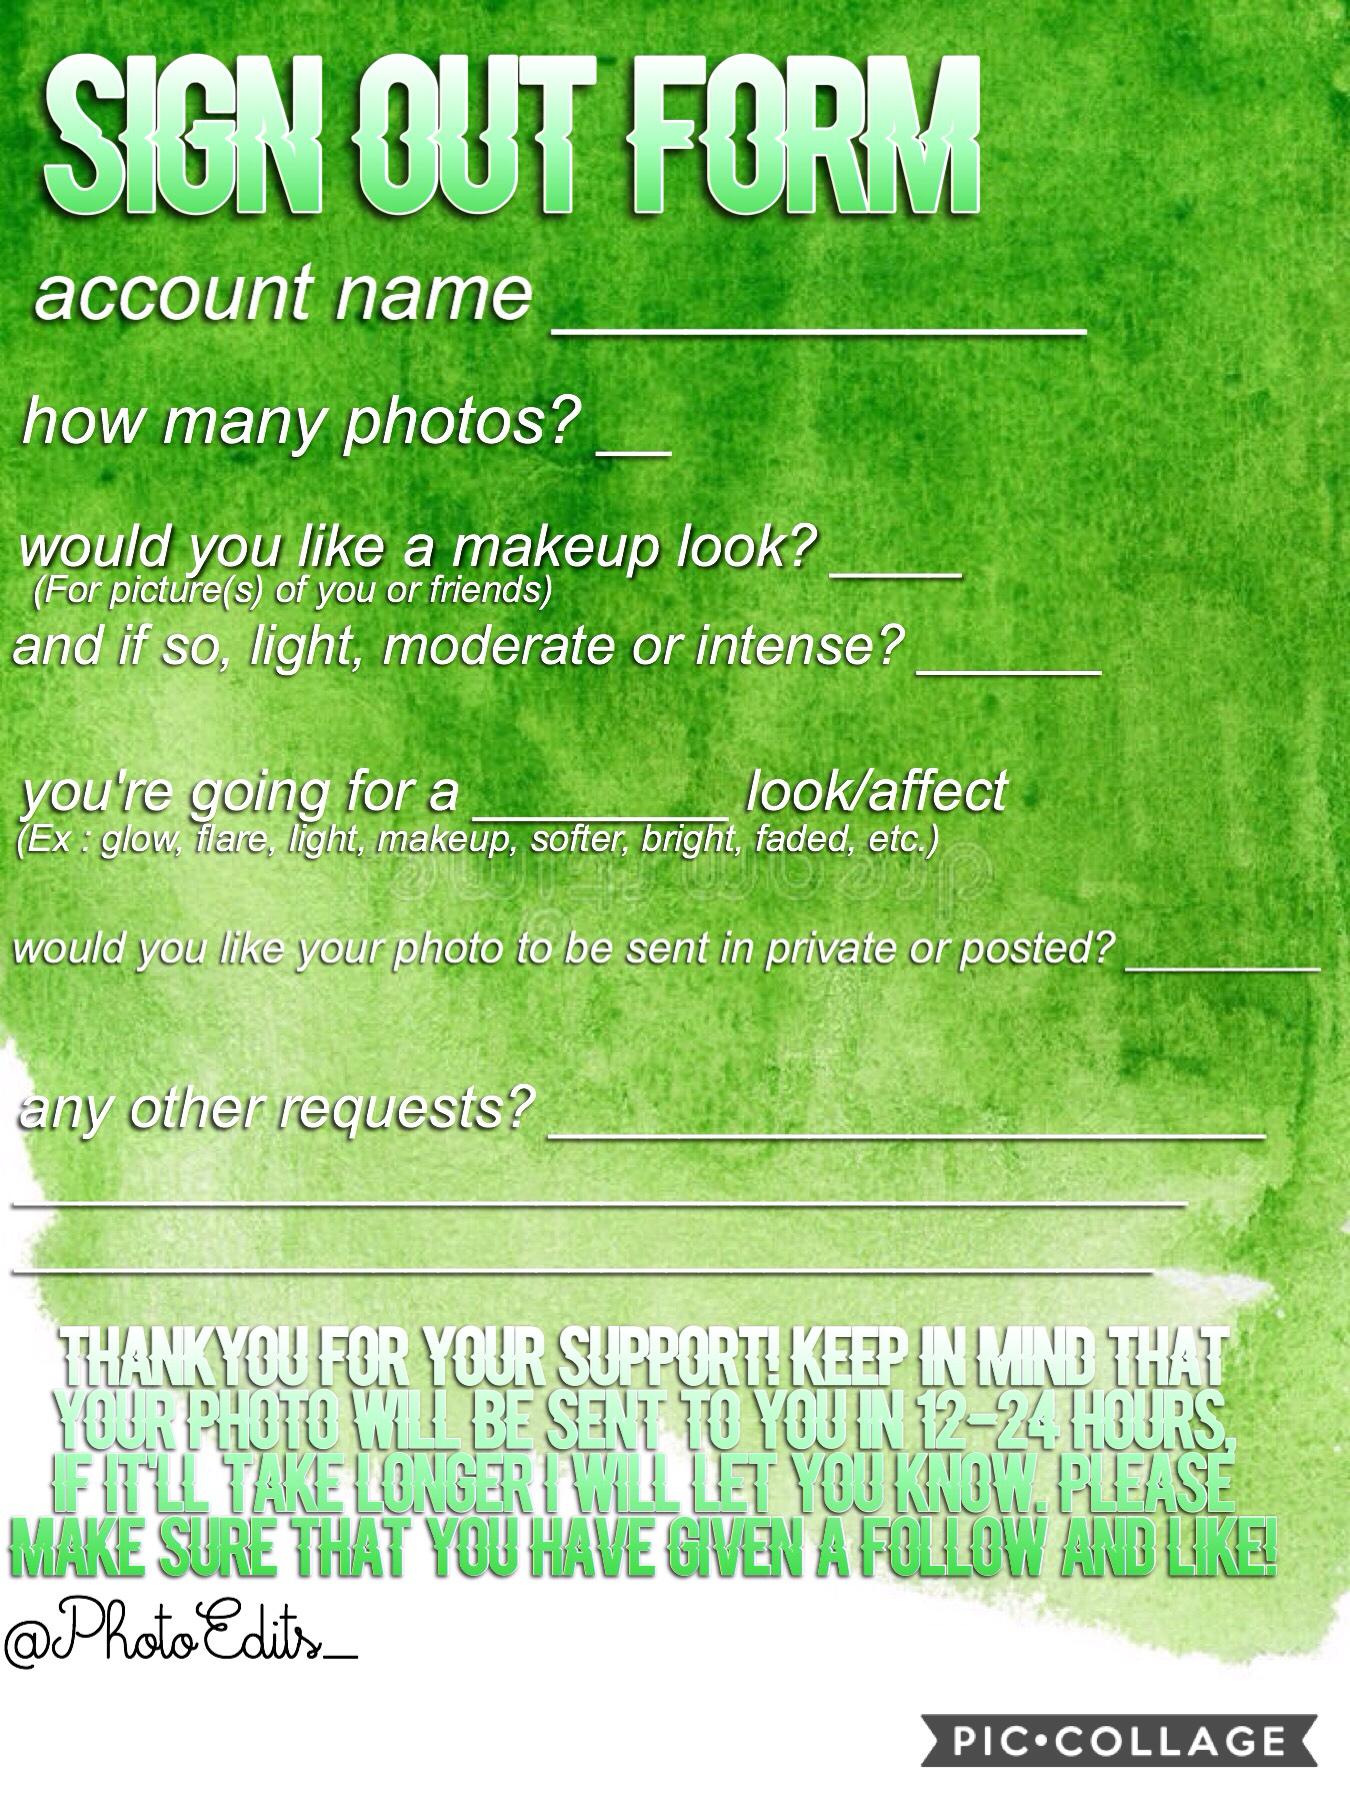 Fill in this form to get your edited photo!